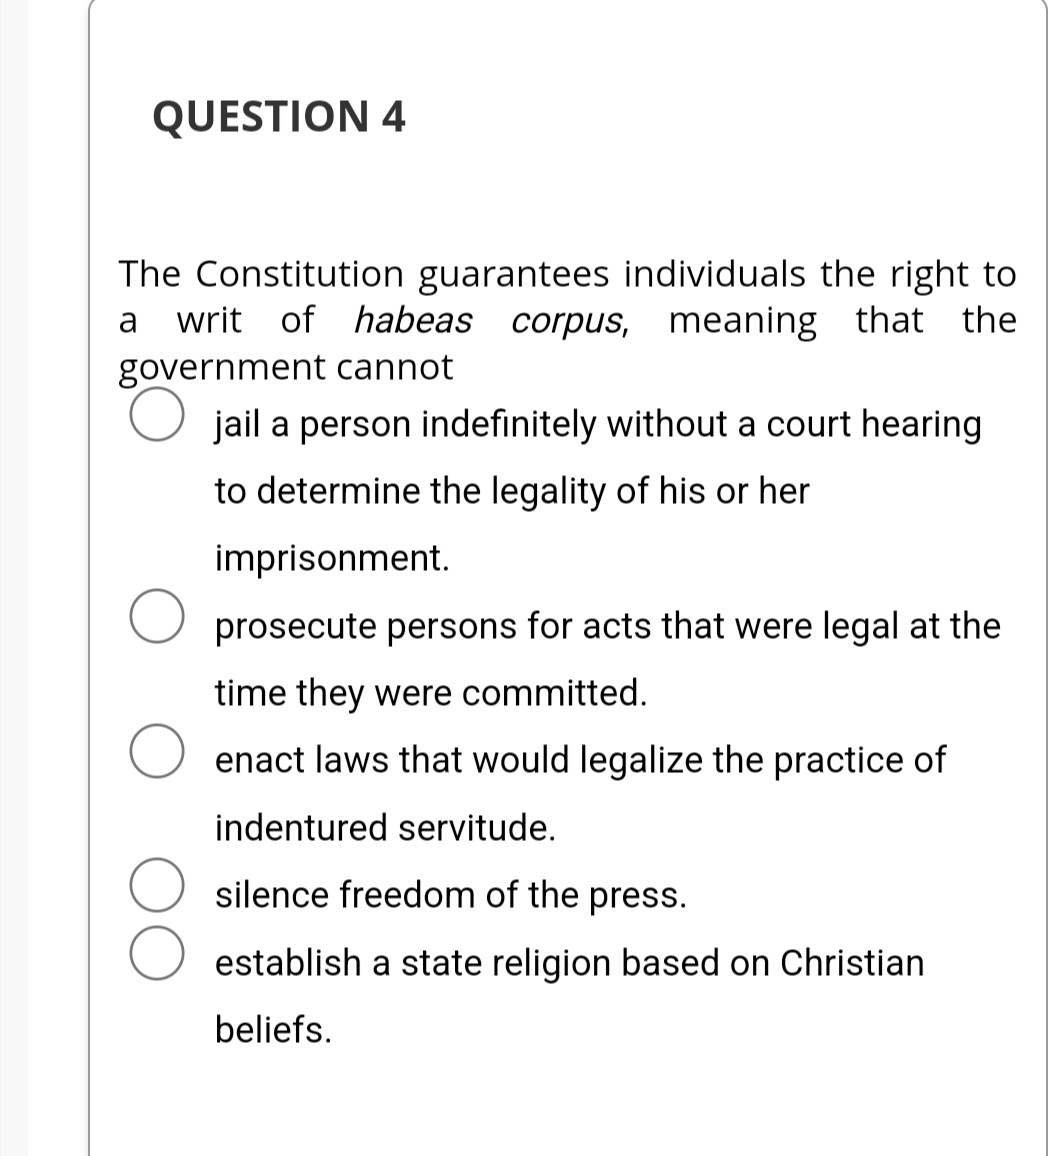 QUESTION 4
The Constitution guarantees individuals the right to
writ of habeas corpus, meaning that the
government cannot
a
O jail a person indefinitely without a court hearing
to determine the legality of his or her
imprisonment.
O prosecute persons for acts that were legal at the
time they were committed.
O enact laws that would legalize the practice of
indentured servitude.
silence freedom of the press.
establish a state religion based on Christian
beliefs.